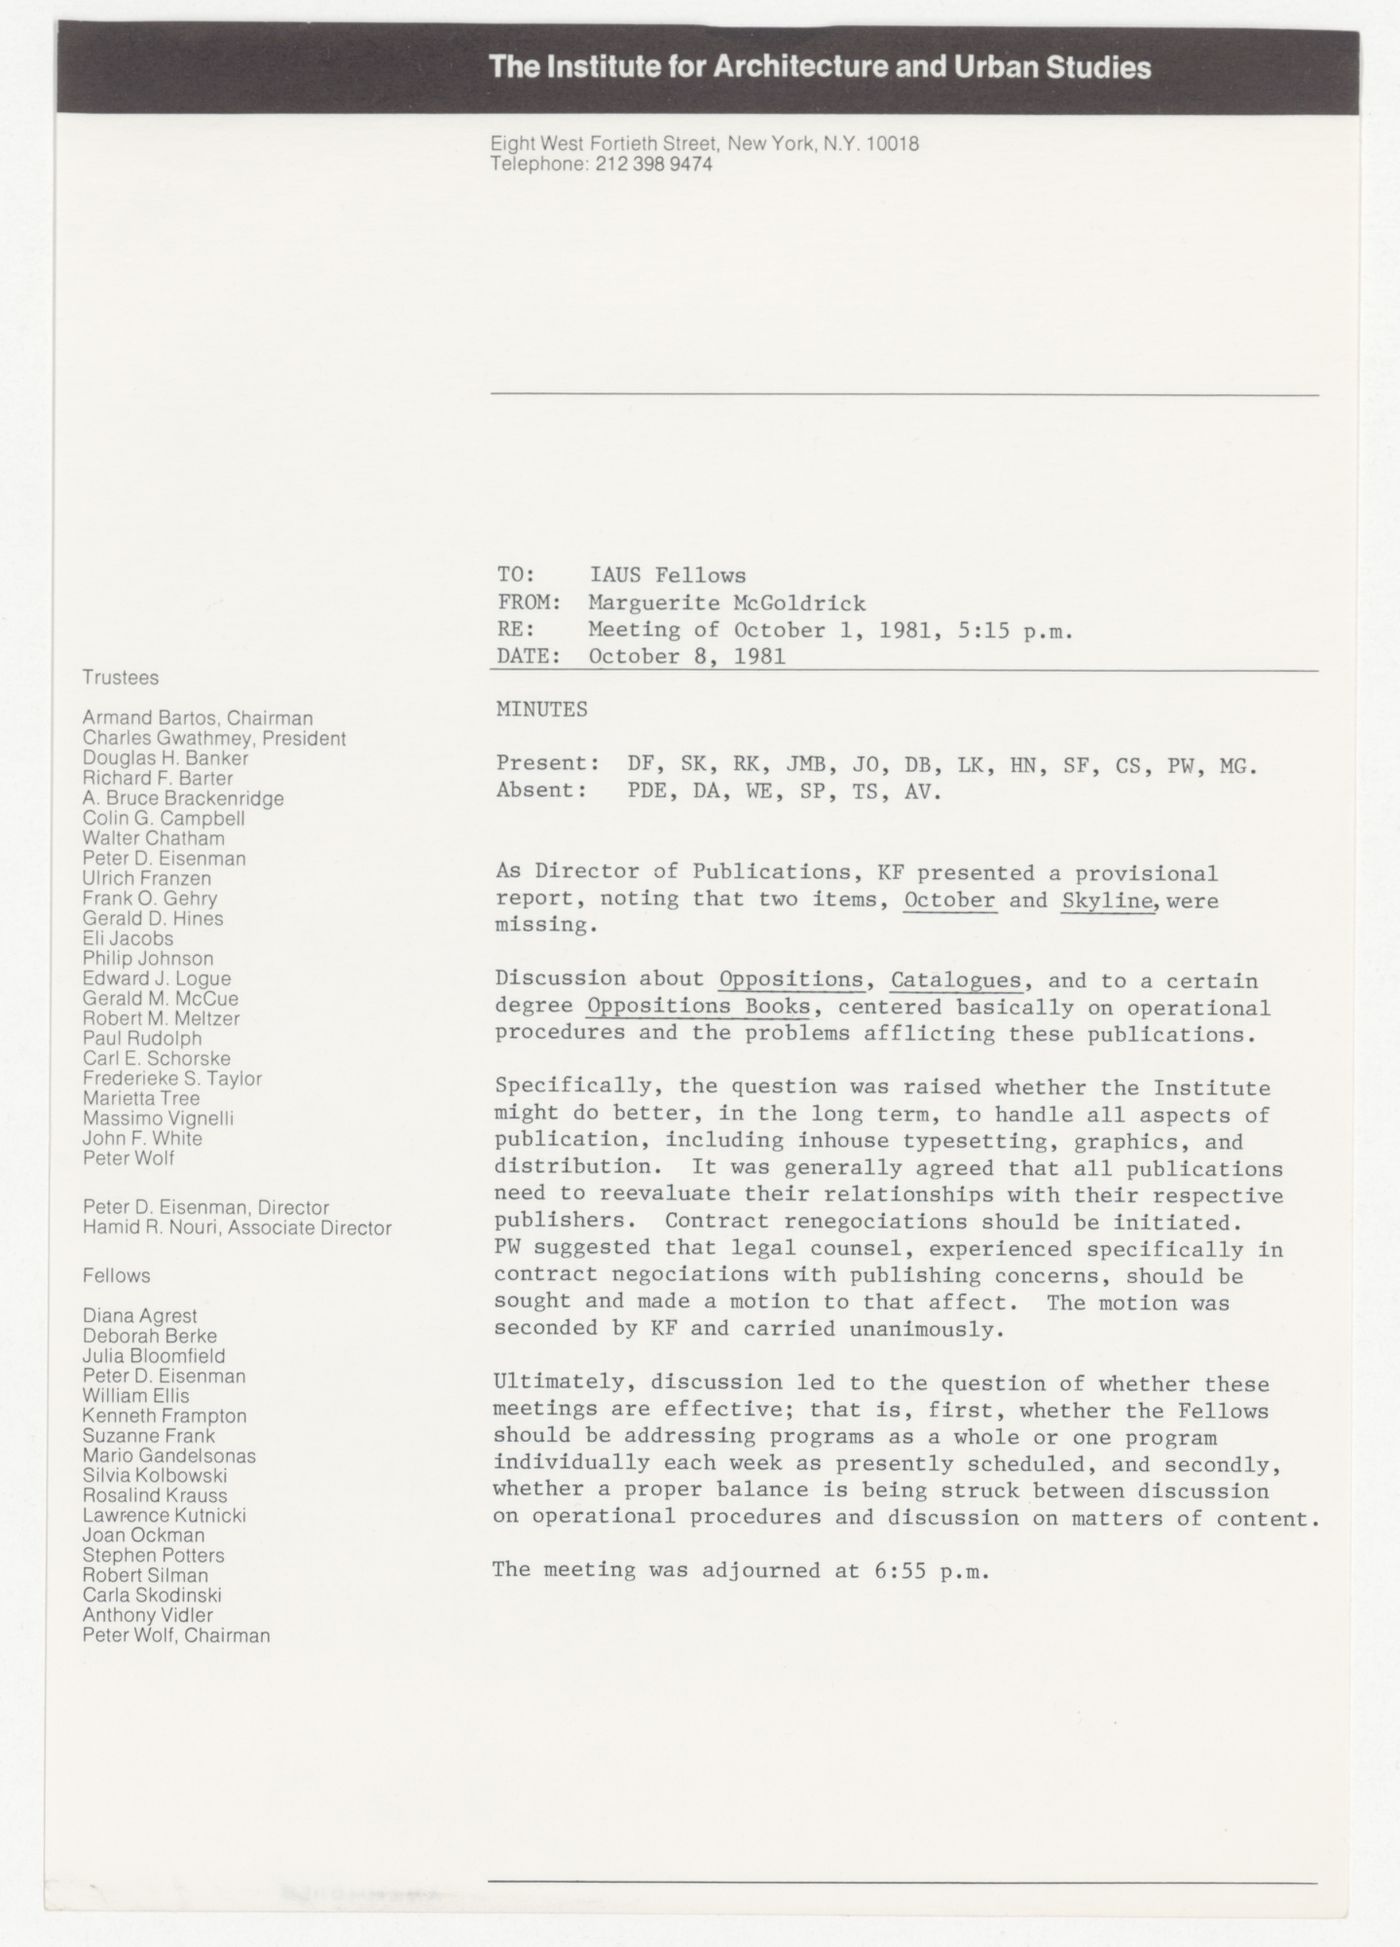 Minutes of meeting of the Fellows on October 1st, 1981